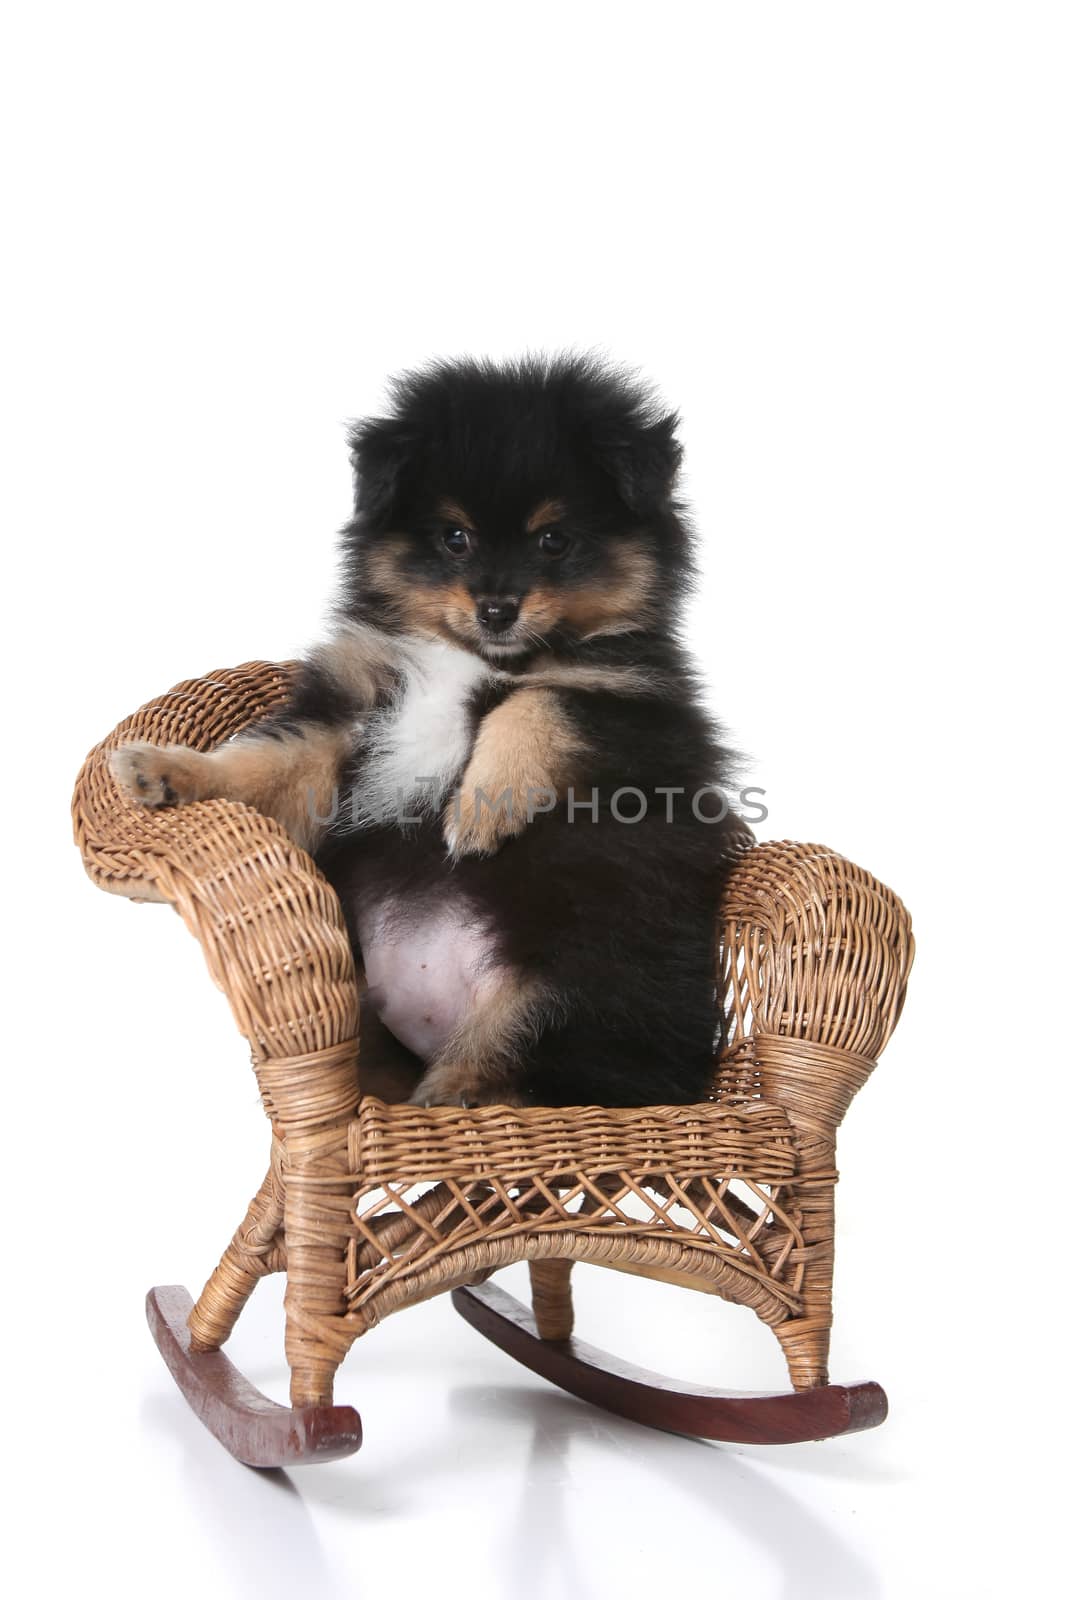 uppy Sitting in a Miniature Wicker Chair Posing by tobkatrina